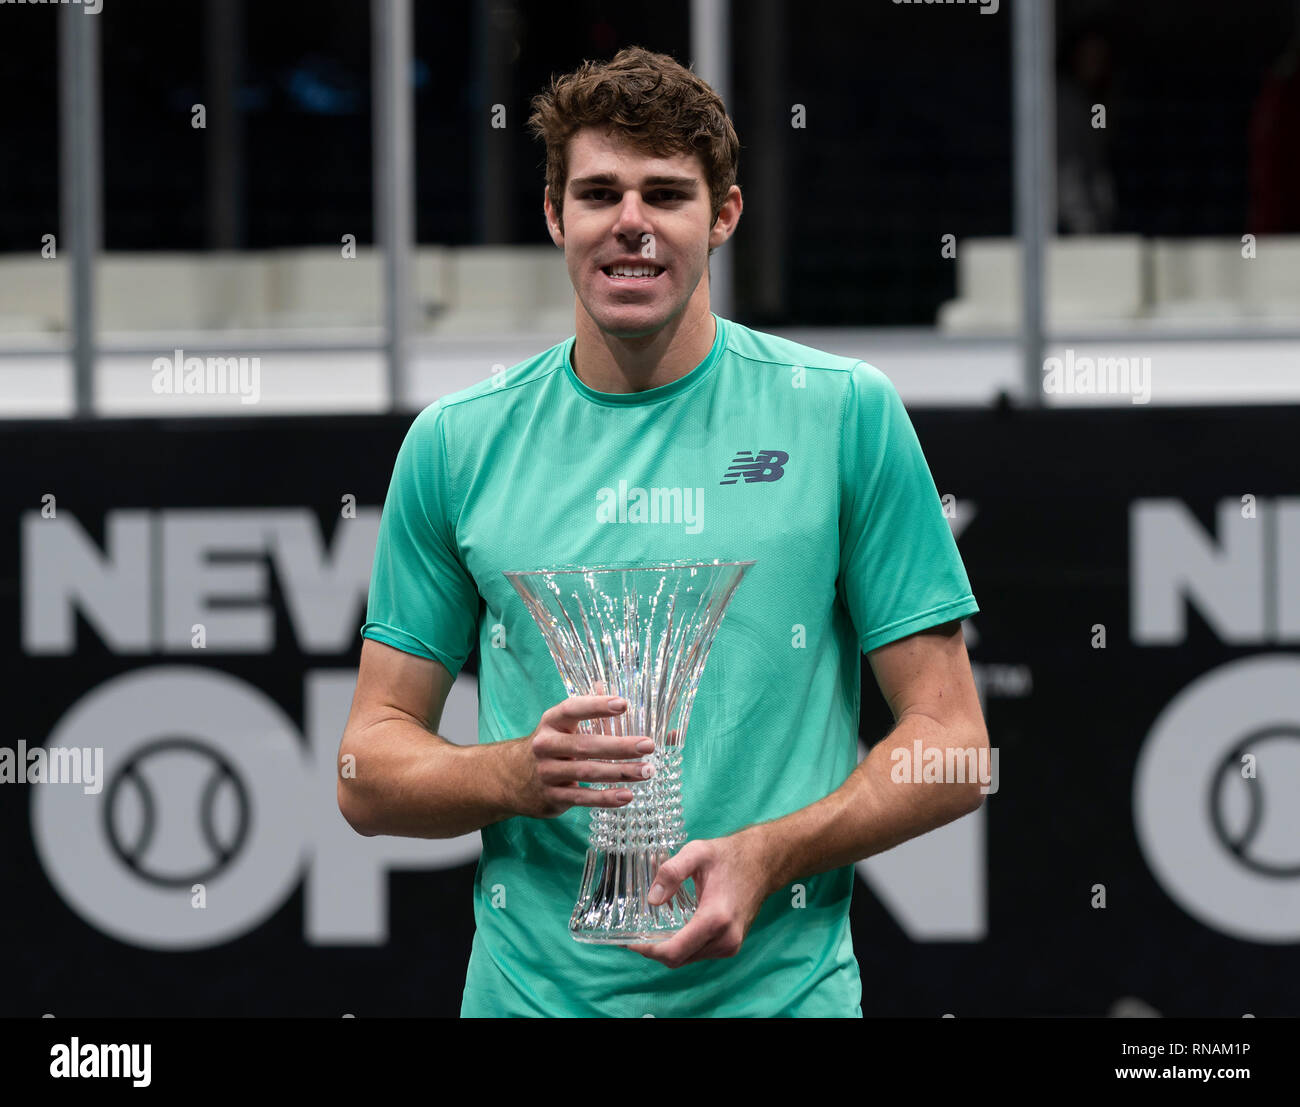 heampstead-united-states-17th-feb-2019-reilly-opelka-of-usa-holds-winner-trophy-after-defeating-brayden-schnur-of-canada-at-final-of-new-york-open-atp-250-tournament-at-nassau-coliseum-credit-lev-radinpacific-pressalamy-live-news-RNAM1P.jpg